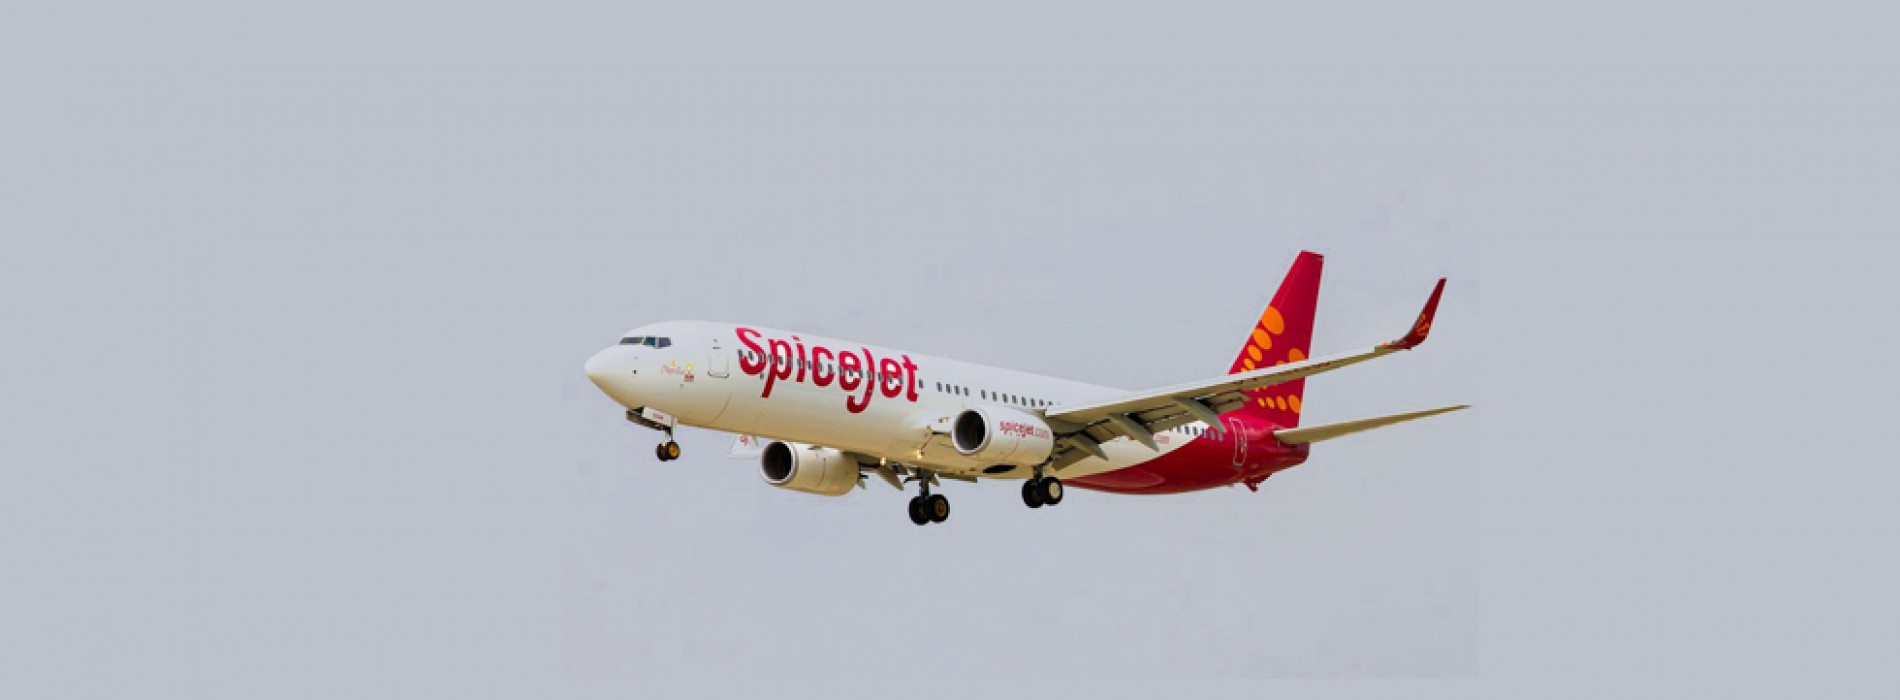 Puducherry back on aviation map as Spice Jet launches daily Hyderabad flights